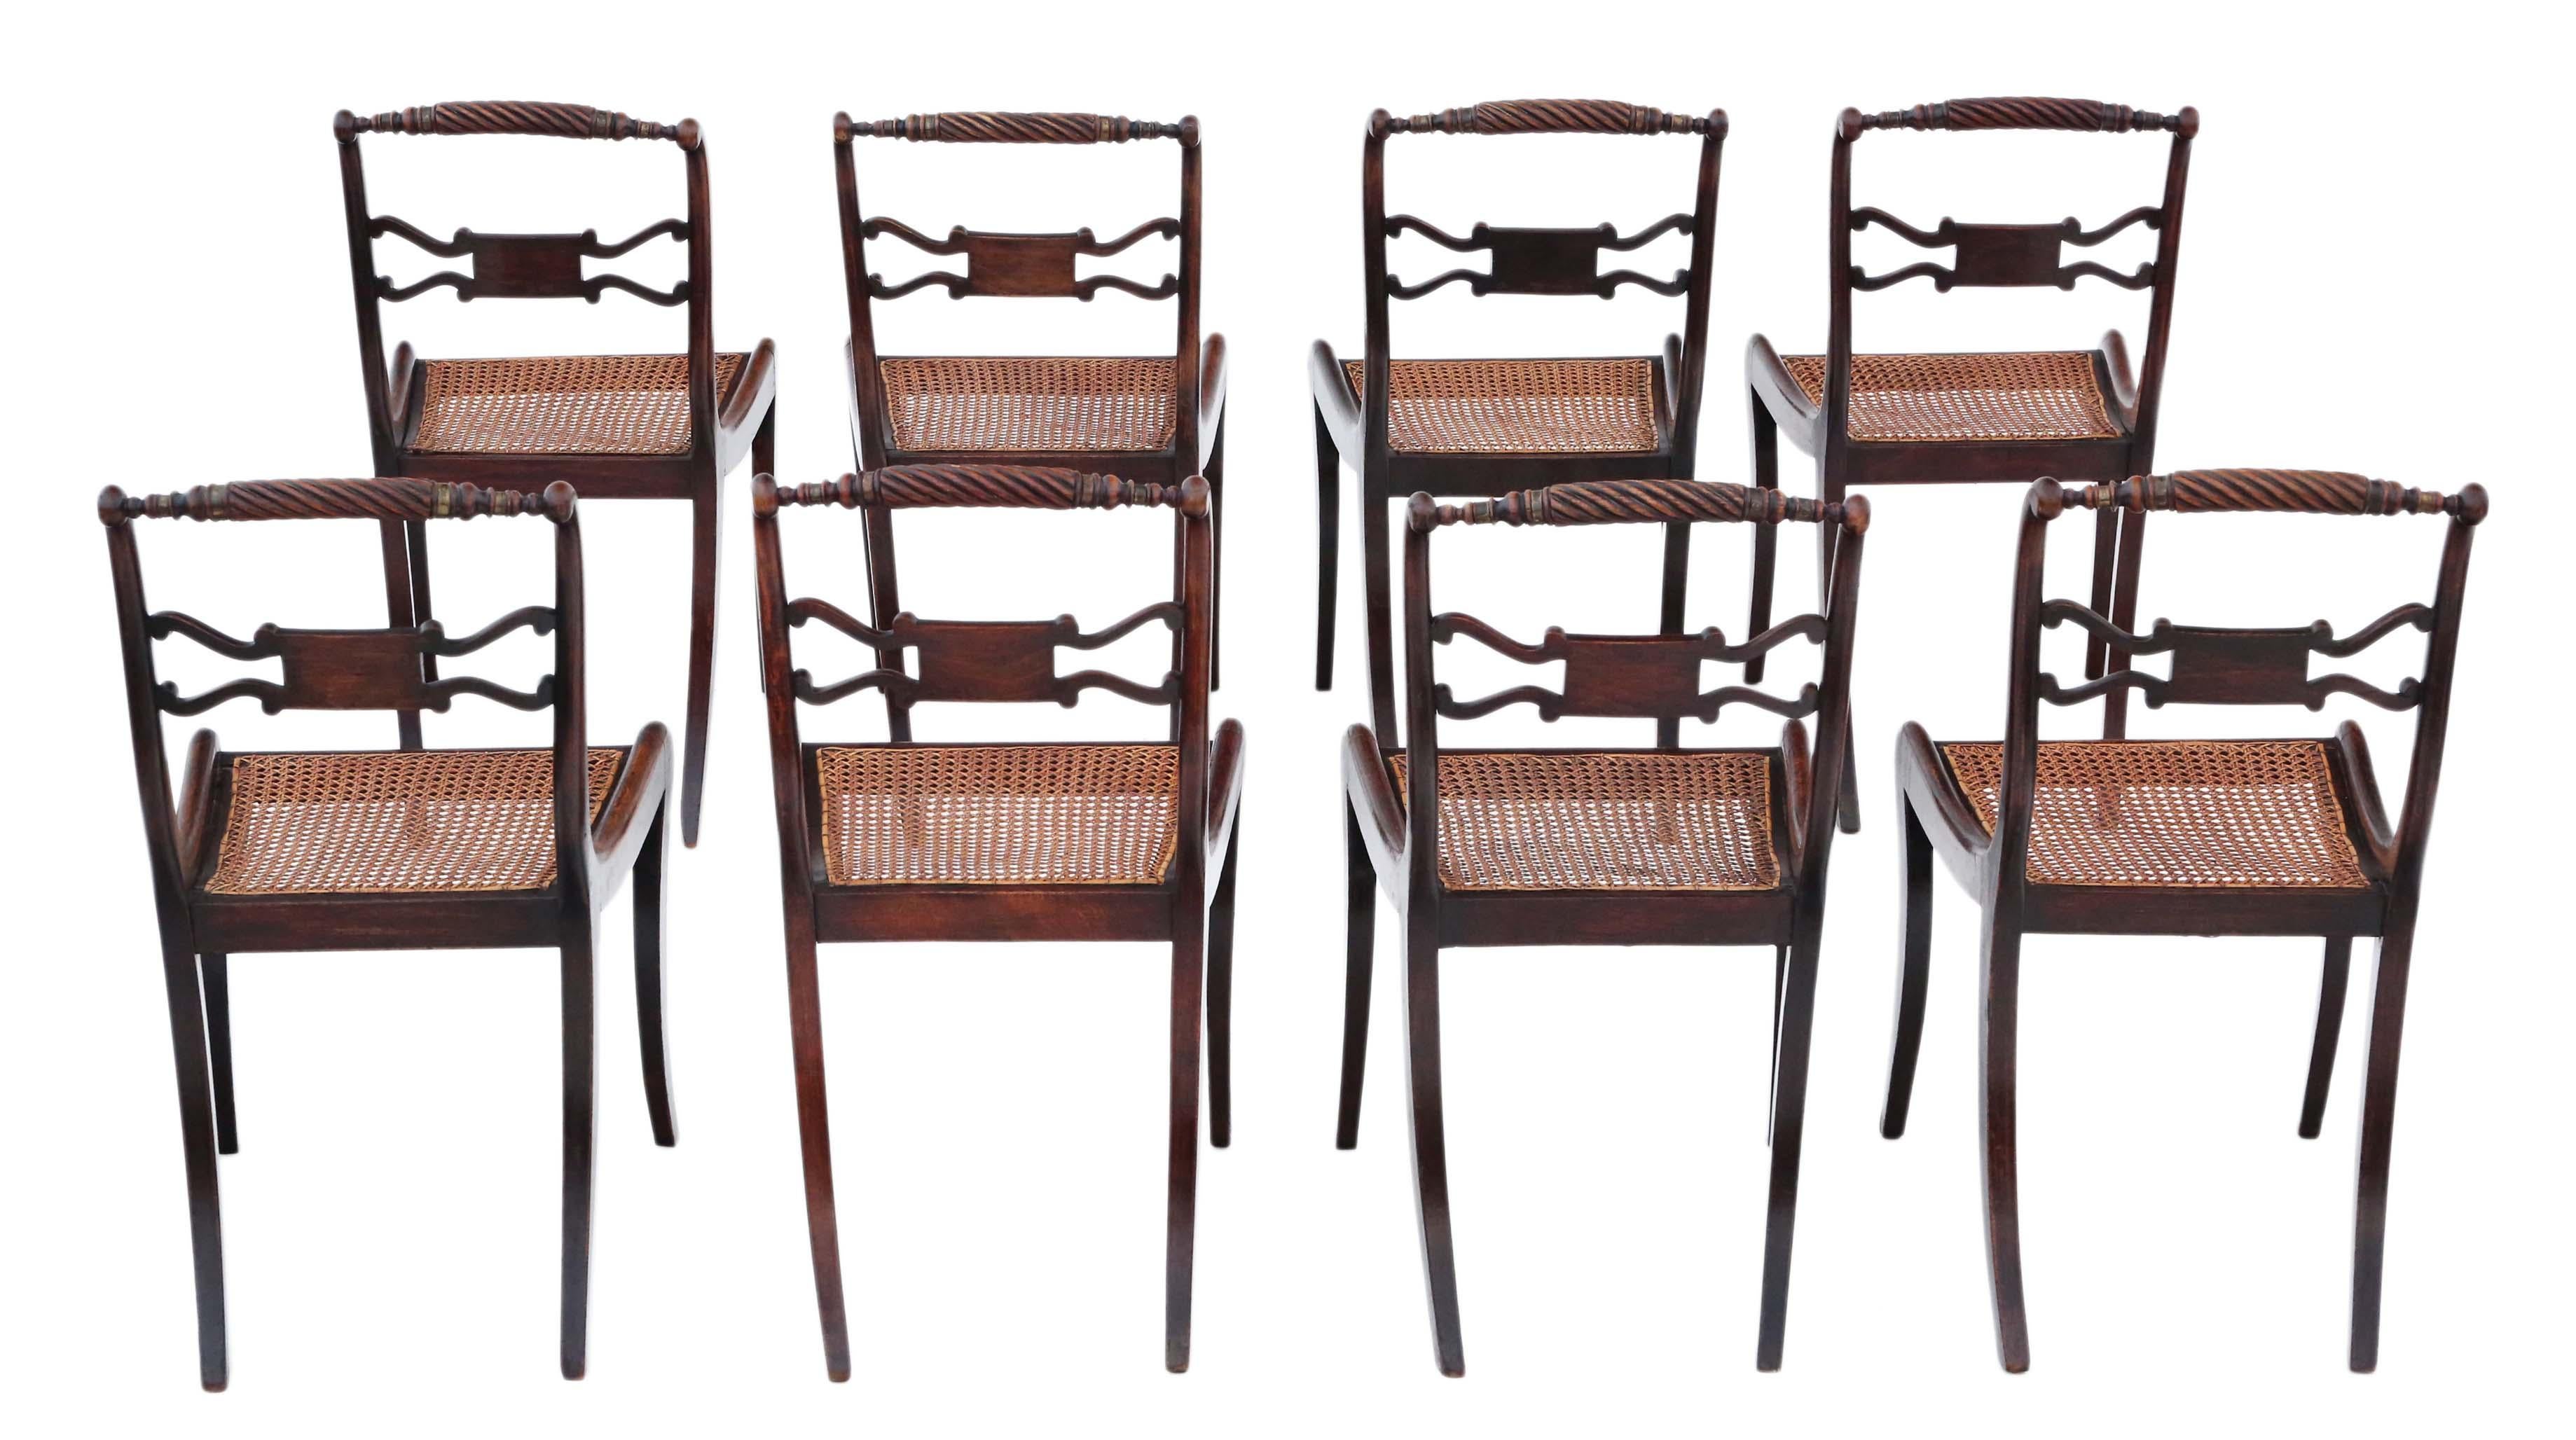 Antique fine quality set of 8 Regency circa 1825 faux rosewood dining chairs, 19th century. The very best color and patina with desirable sabre front legs. Very rare!

Solid with no loose joints. Lovely elegant design with brass work. No